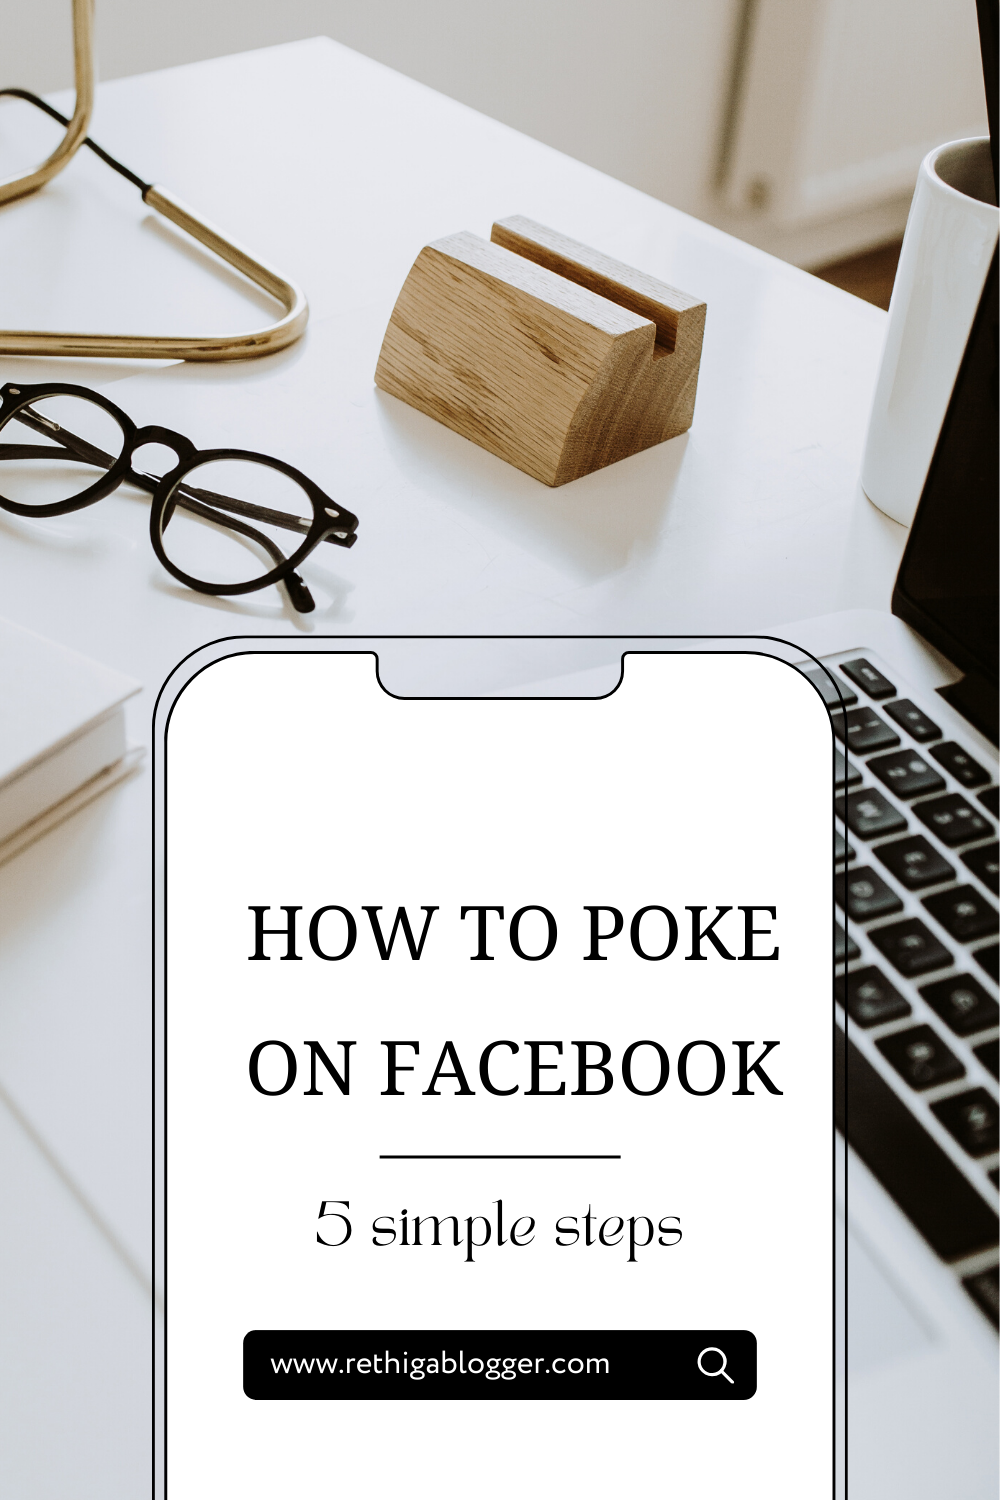 How to poke on Facebook